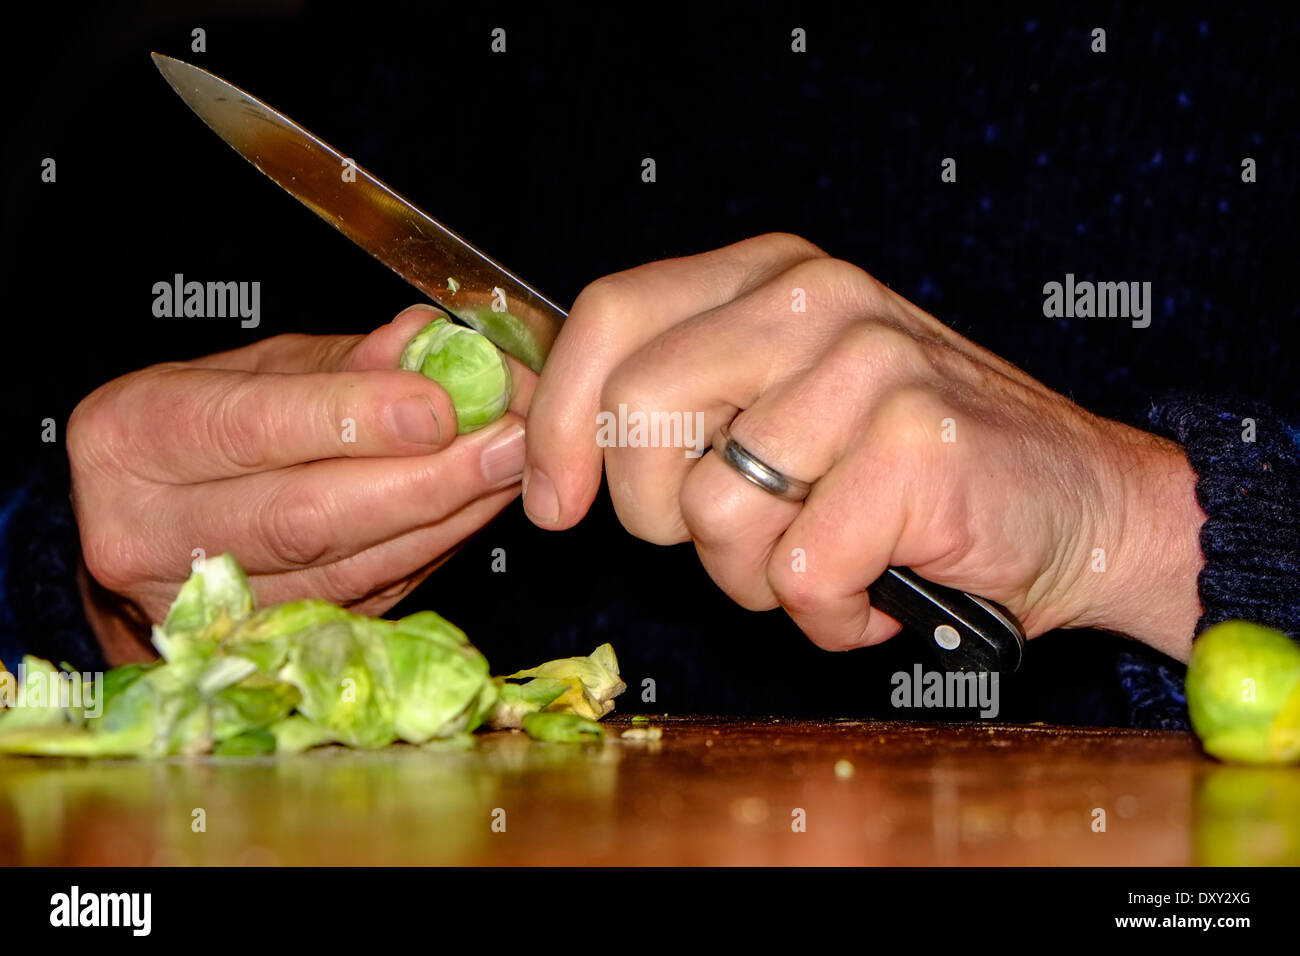 Close-up of hands peeling fresh organic brussels sprouts Stock Photo